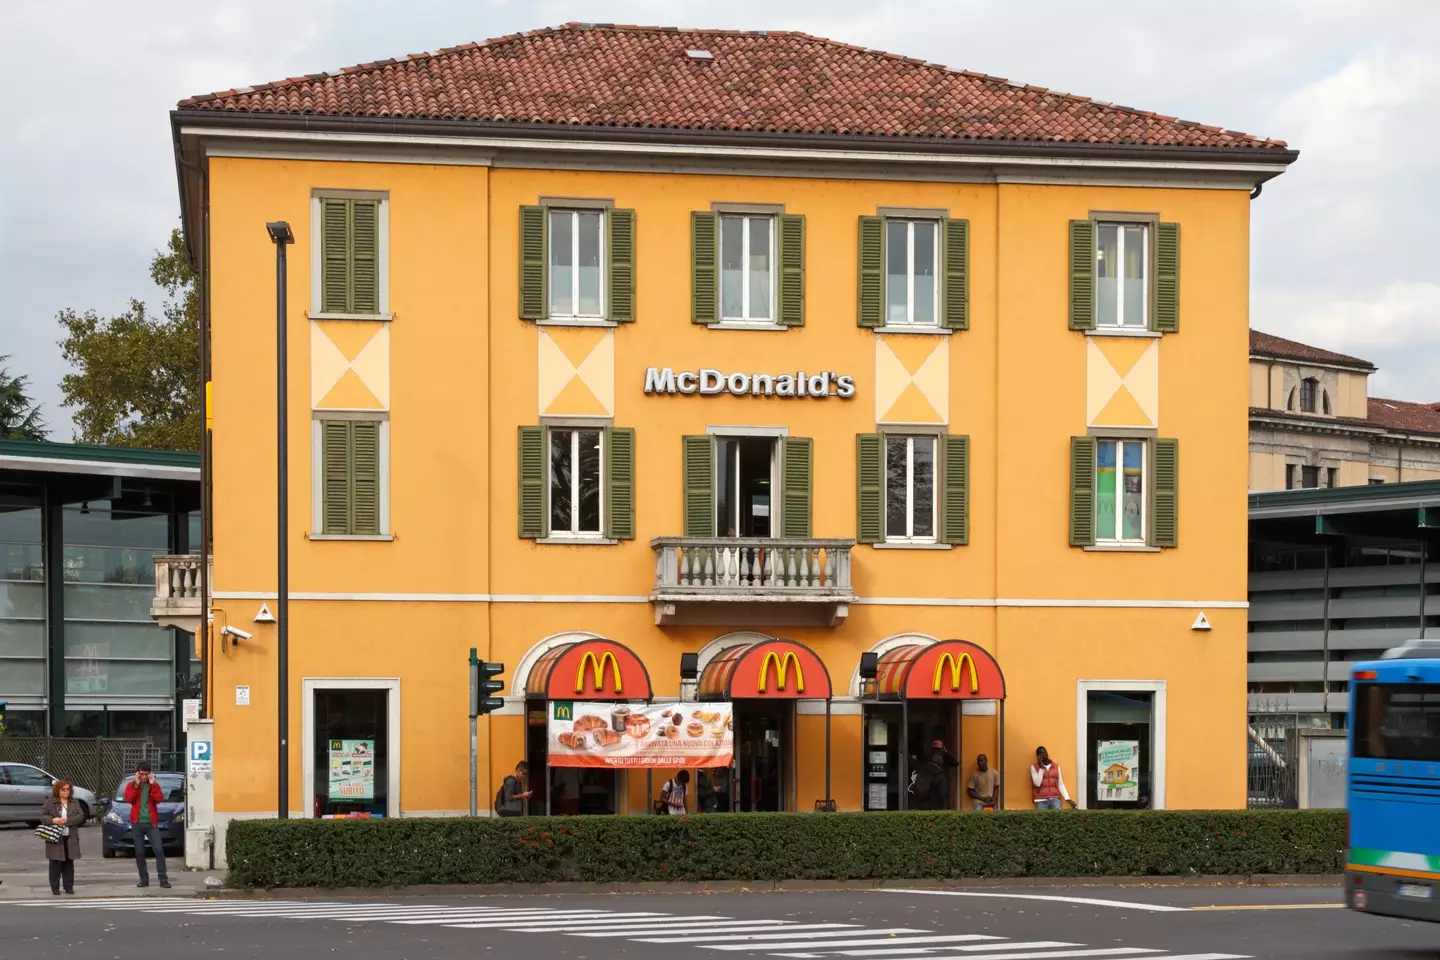 McDonald's restaurants in Italy serve blocks of cheese as part of their menu. (